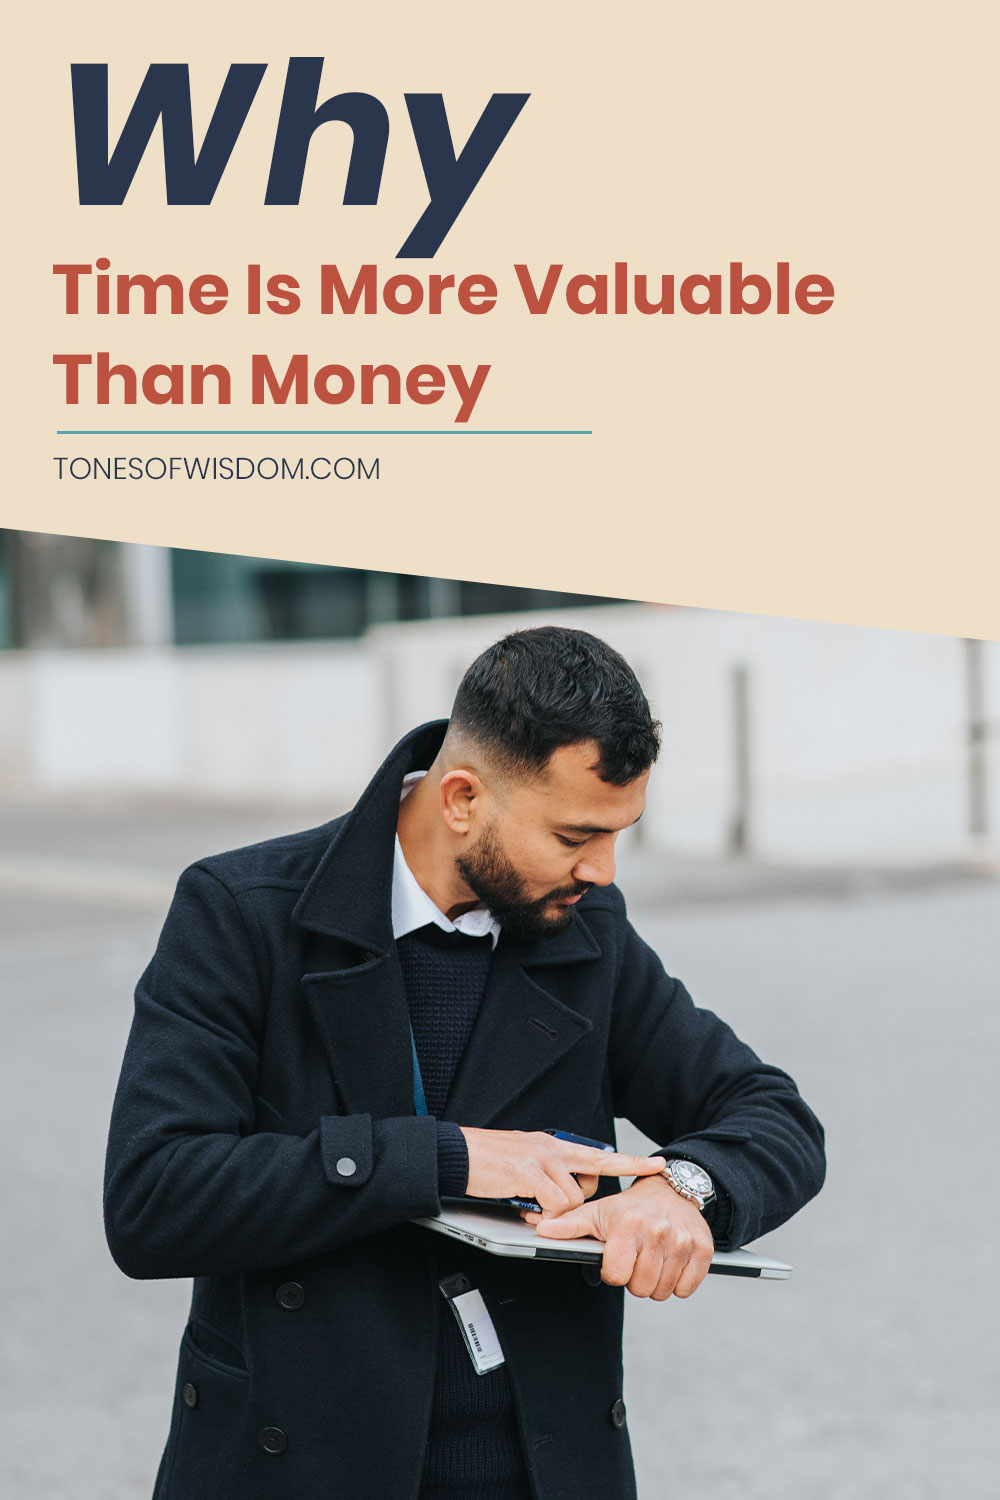 Why Time Is More Valuable Than Money